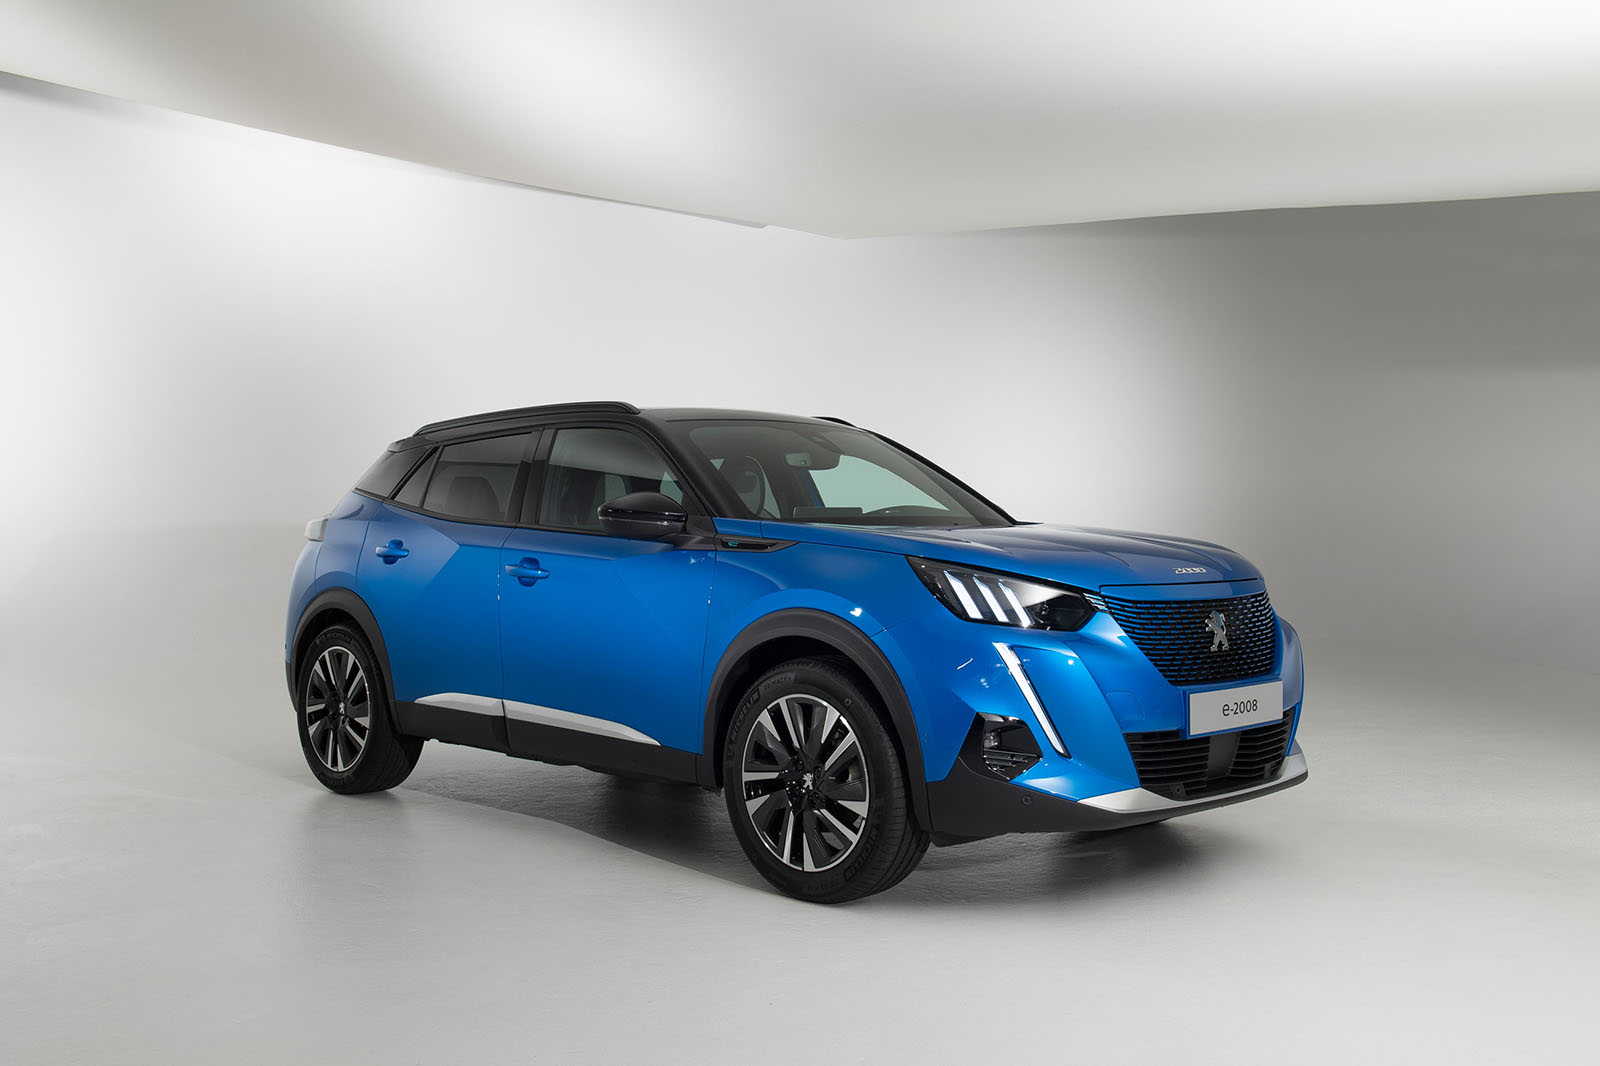 Peugeot 2008 SUV Features, Functions, Specification